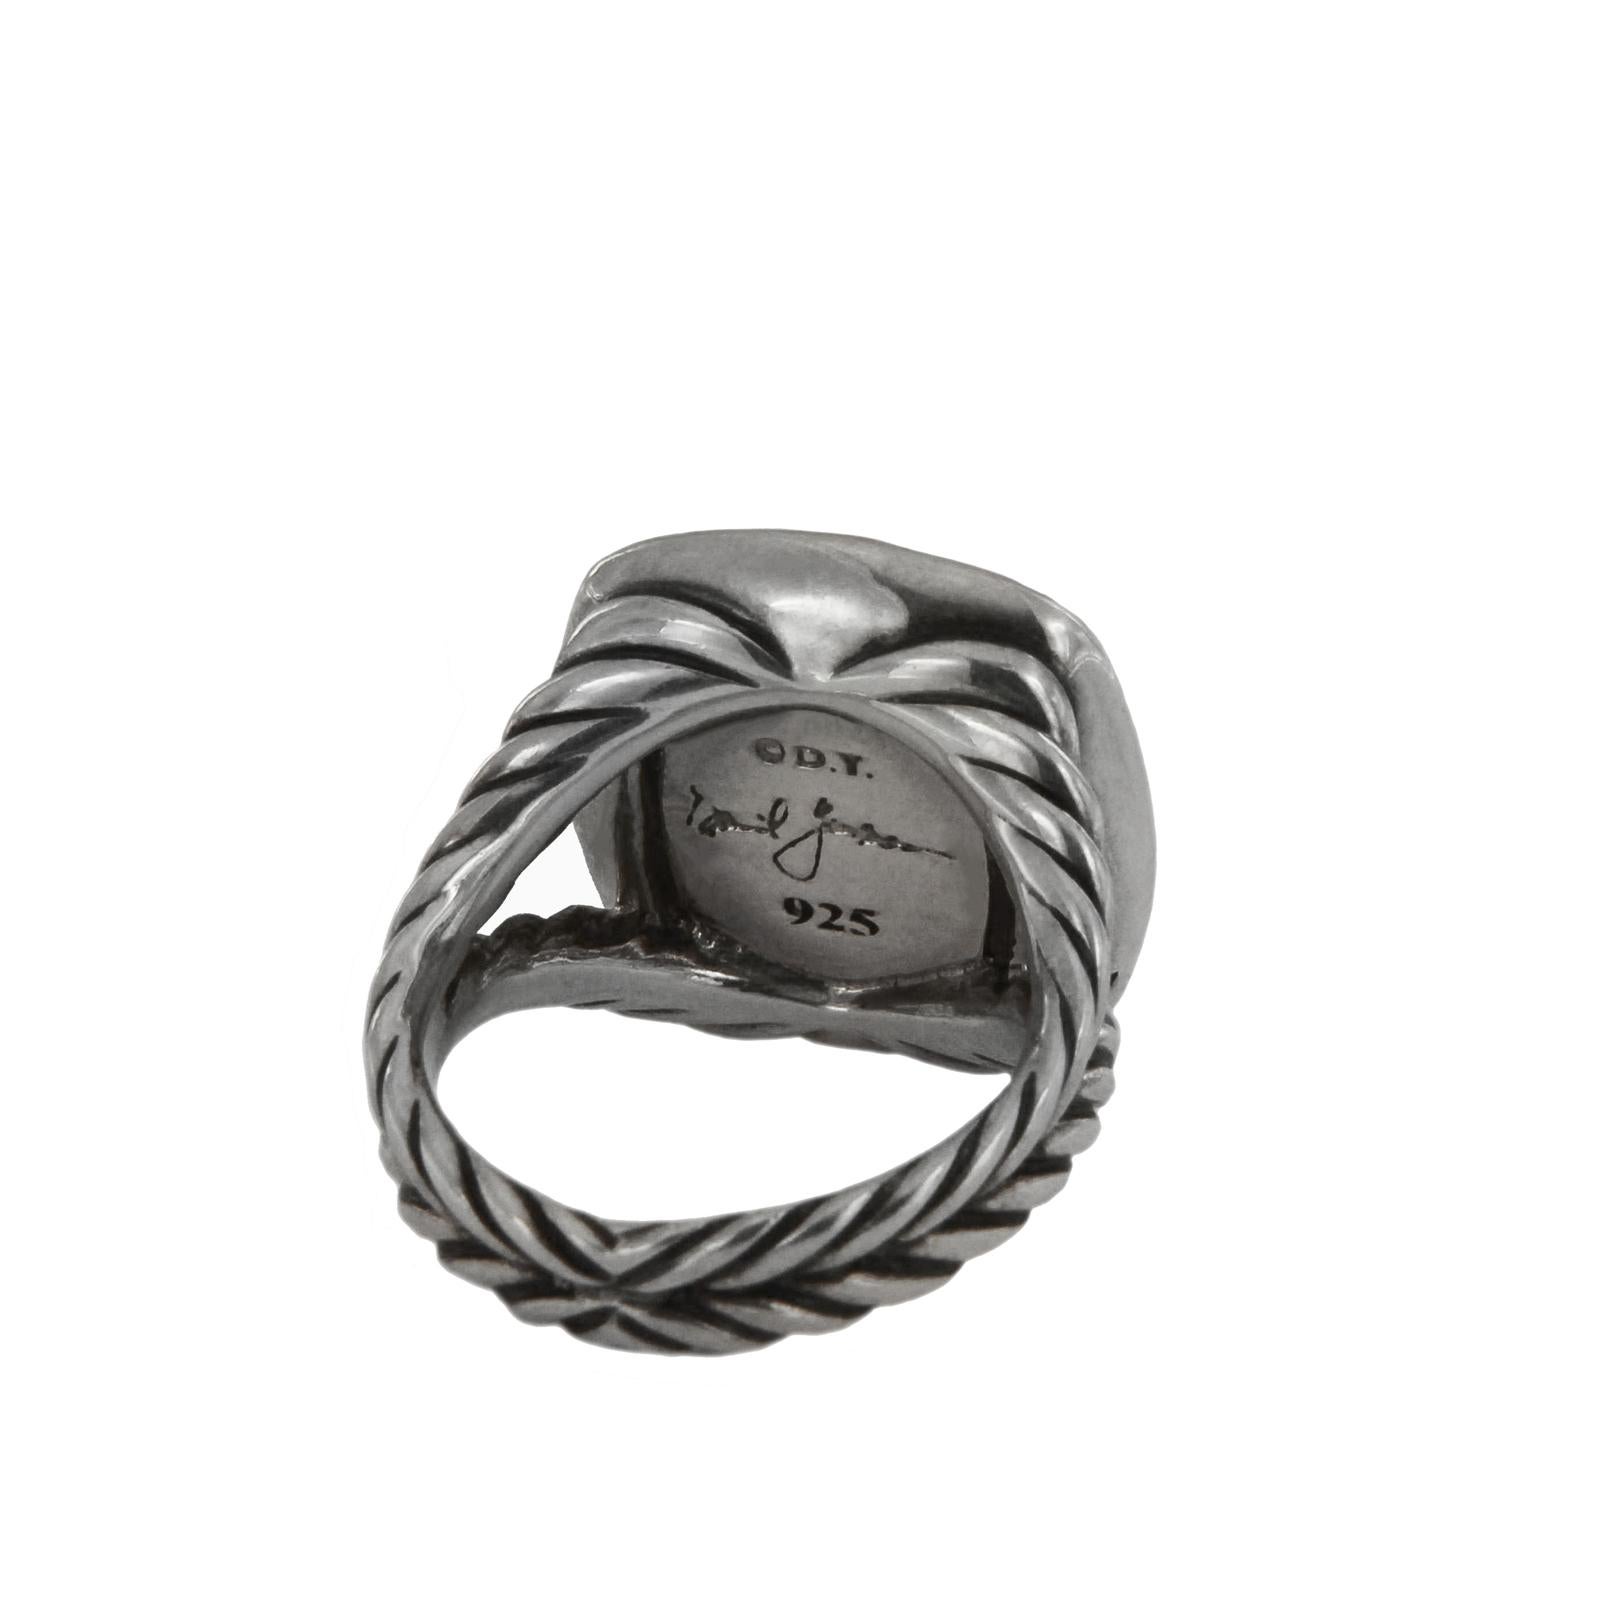 DAVID YURMAN ALBION RING WITH DIAMONDS 11 mm

Mint condition
Sterling silver
Ring size: 6.5
Diamonds: 0.59 total carat weight
11mm wide

Comes with David Yurman box.
Retail: $1,750.00